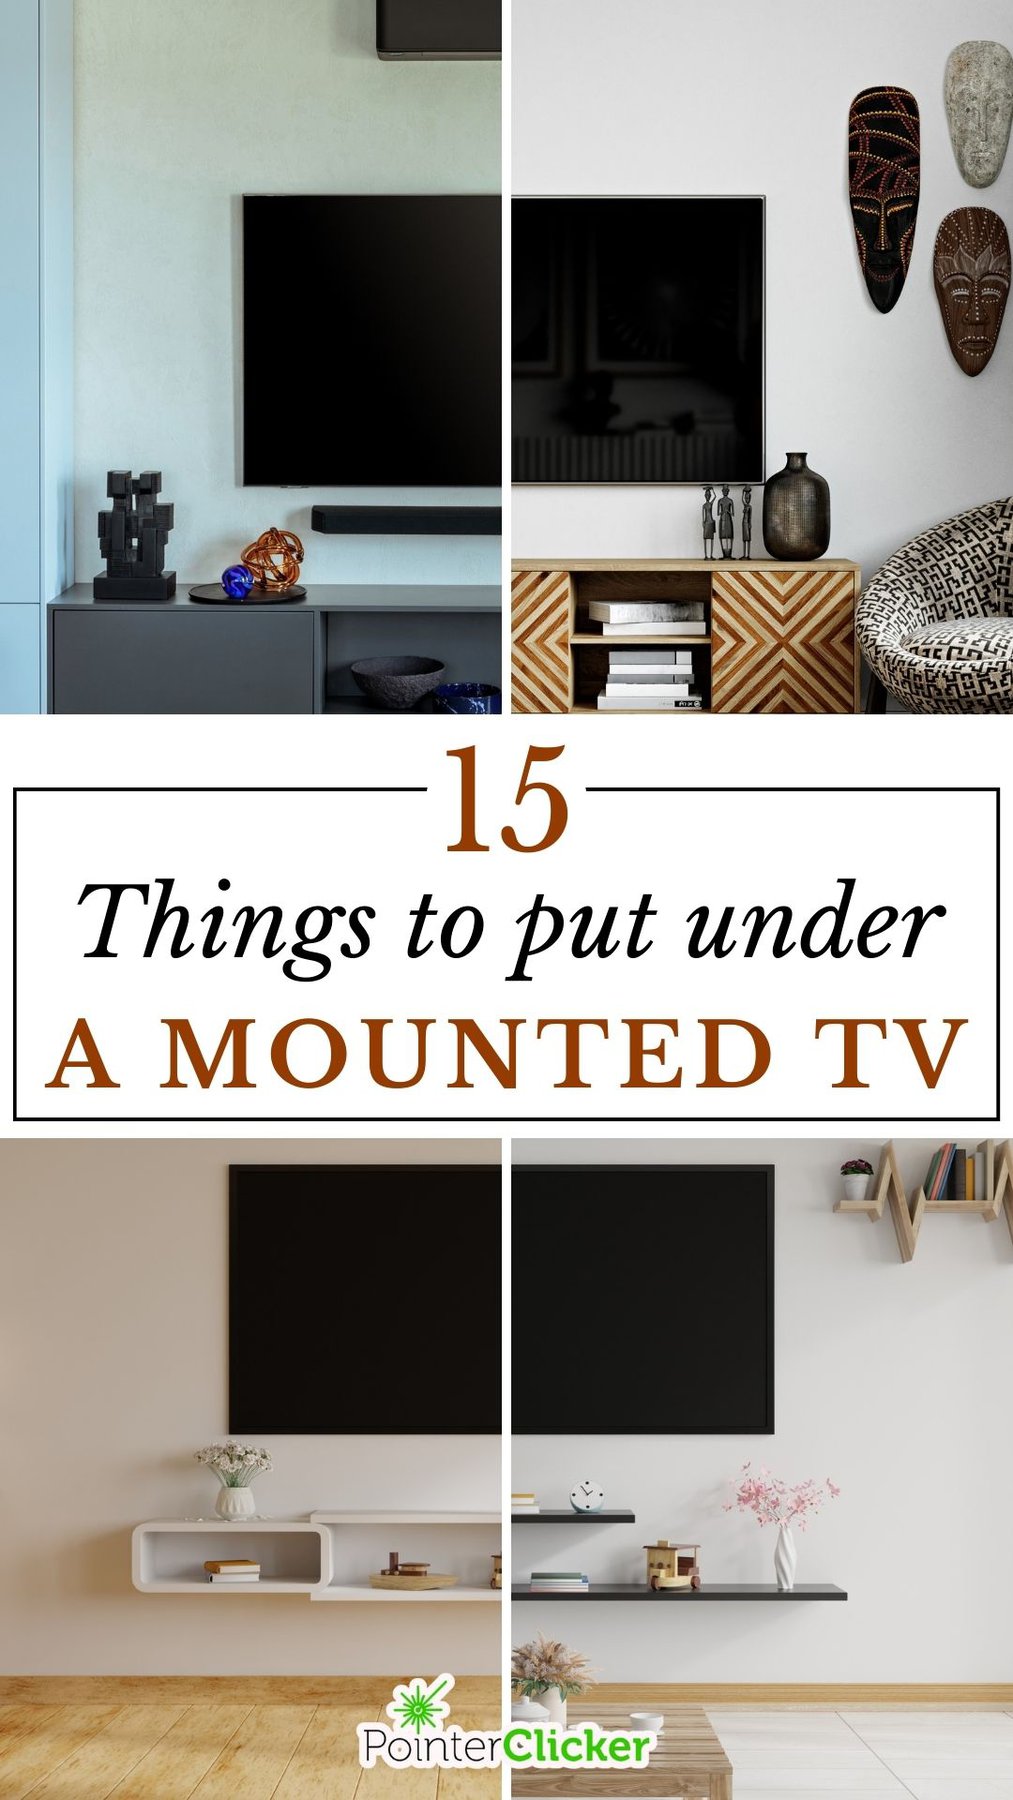 15 items to put under a mounted tv